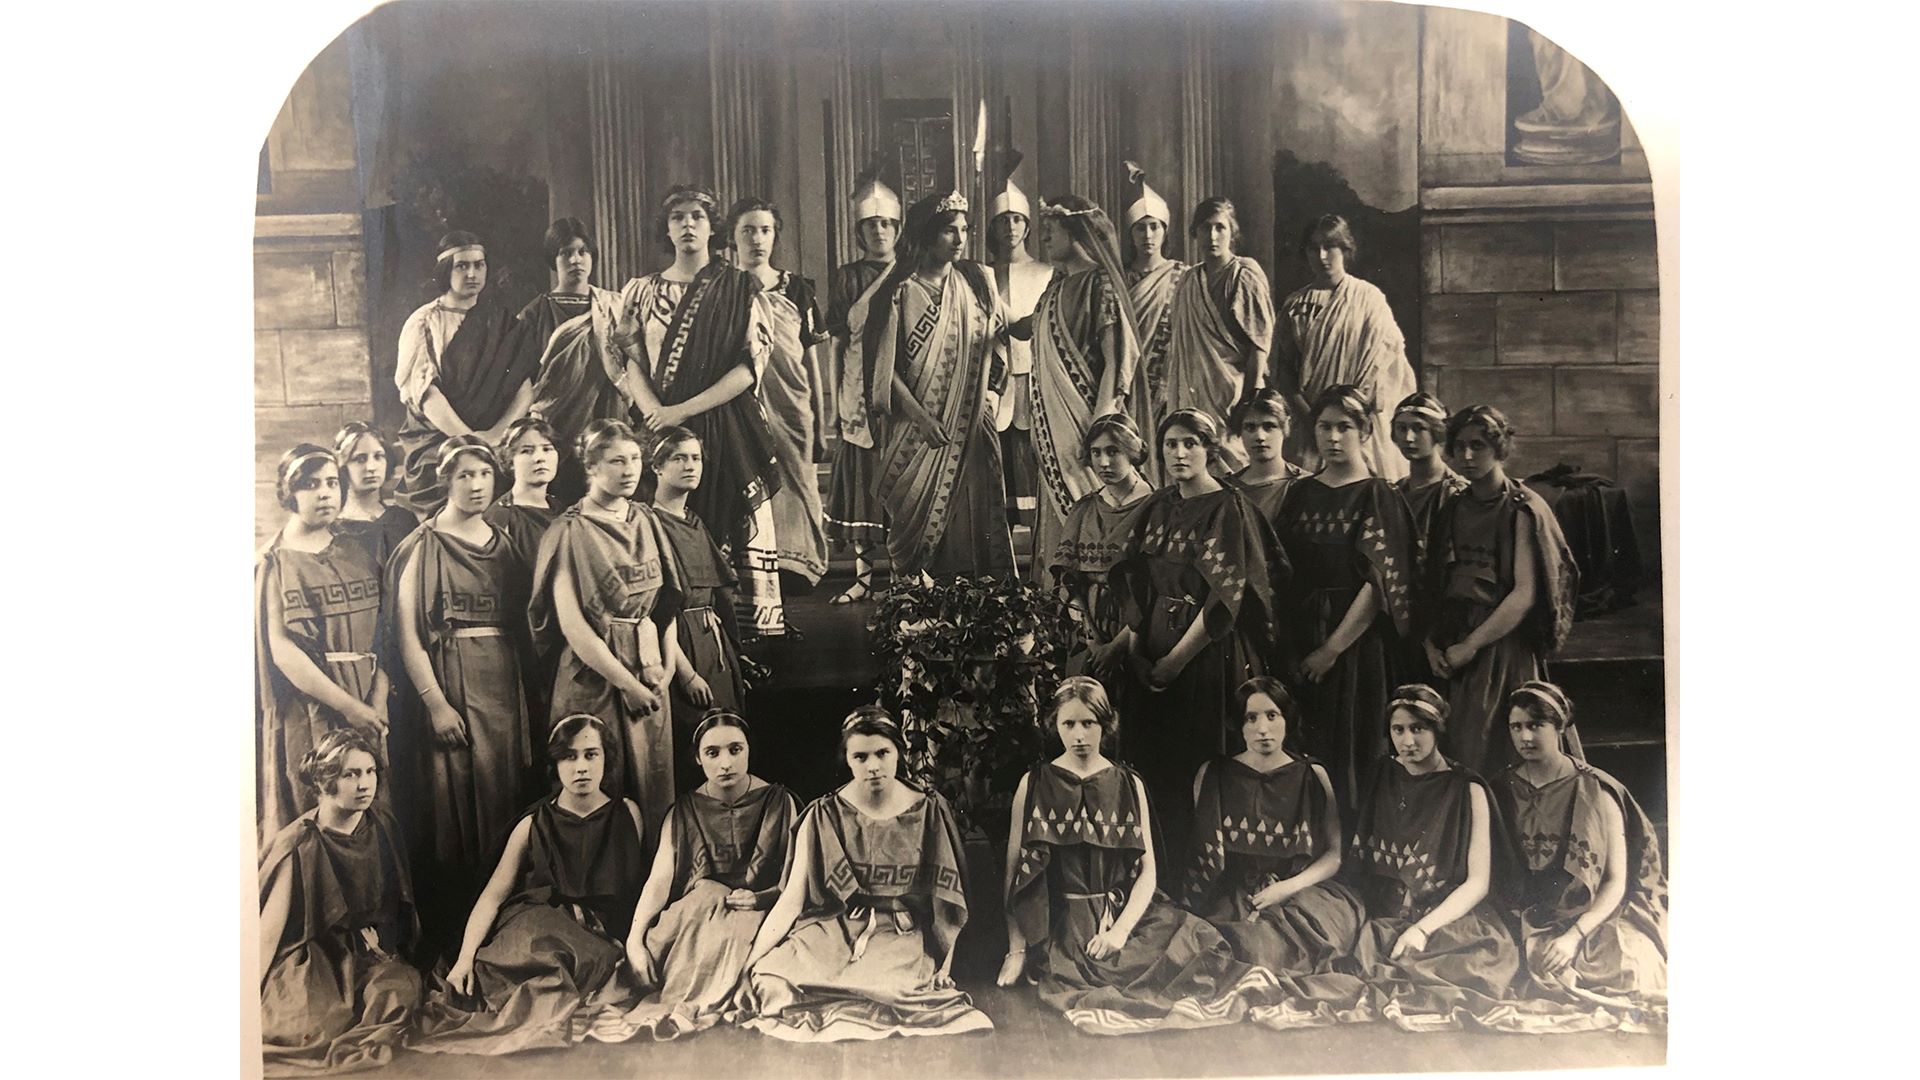 A performance of an unknown Greek play. The photo will be on display as part of an exhibition exploring the history of theatre and performance at Edge Hill University.